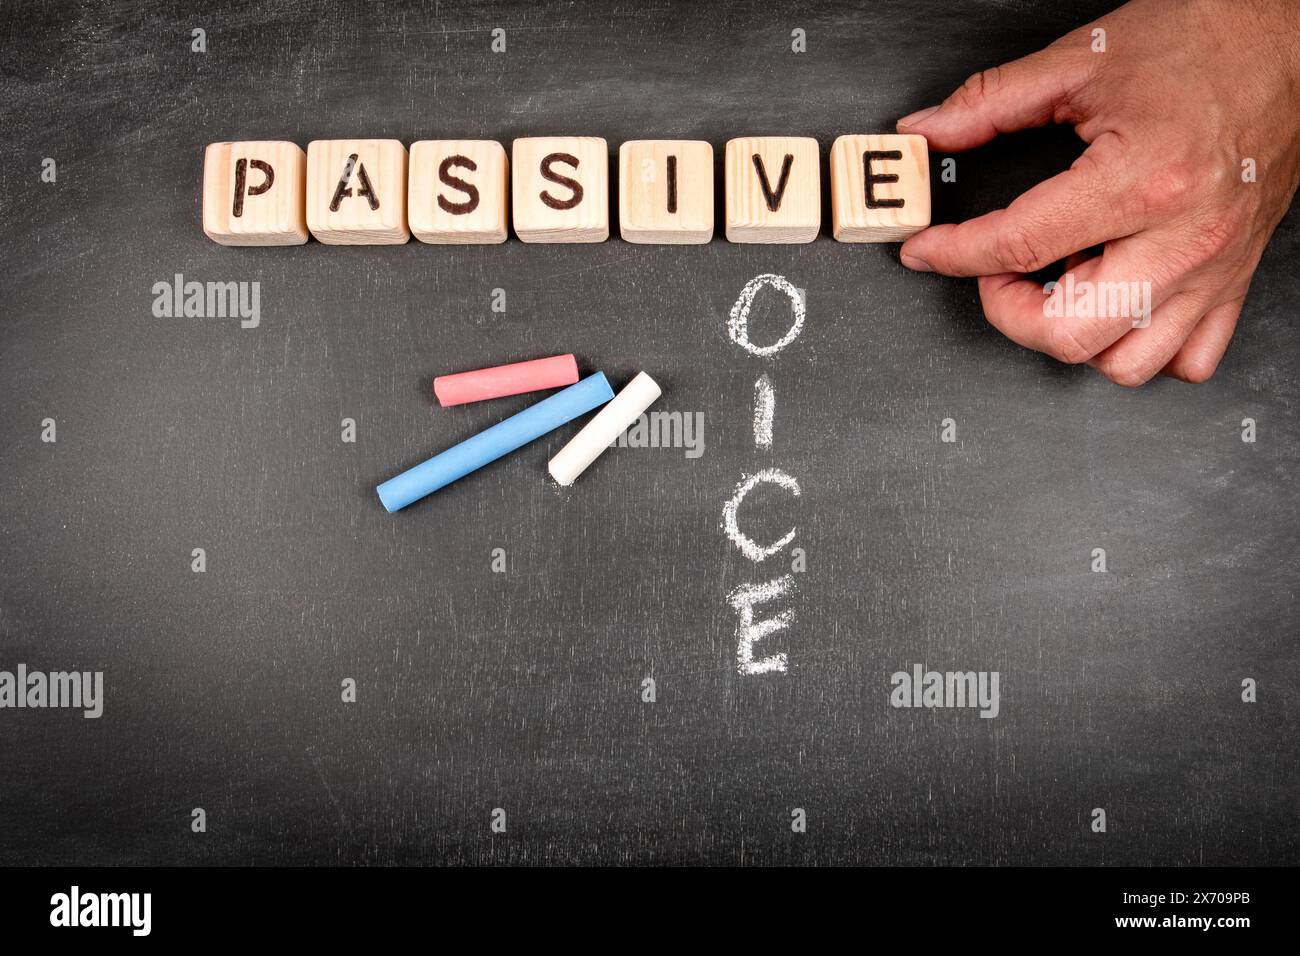 Passive voice. Wooden block crossword puzzle and pieces of chalk on a chalkboard background. Stock Photo